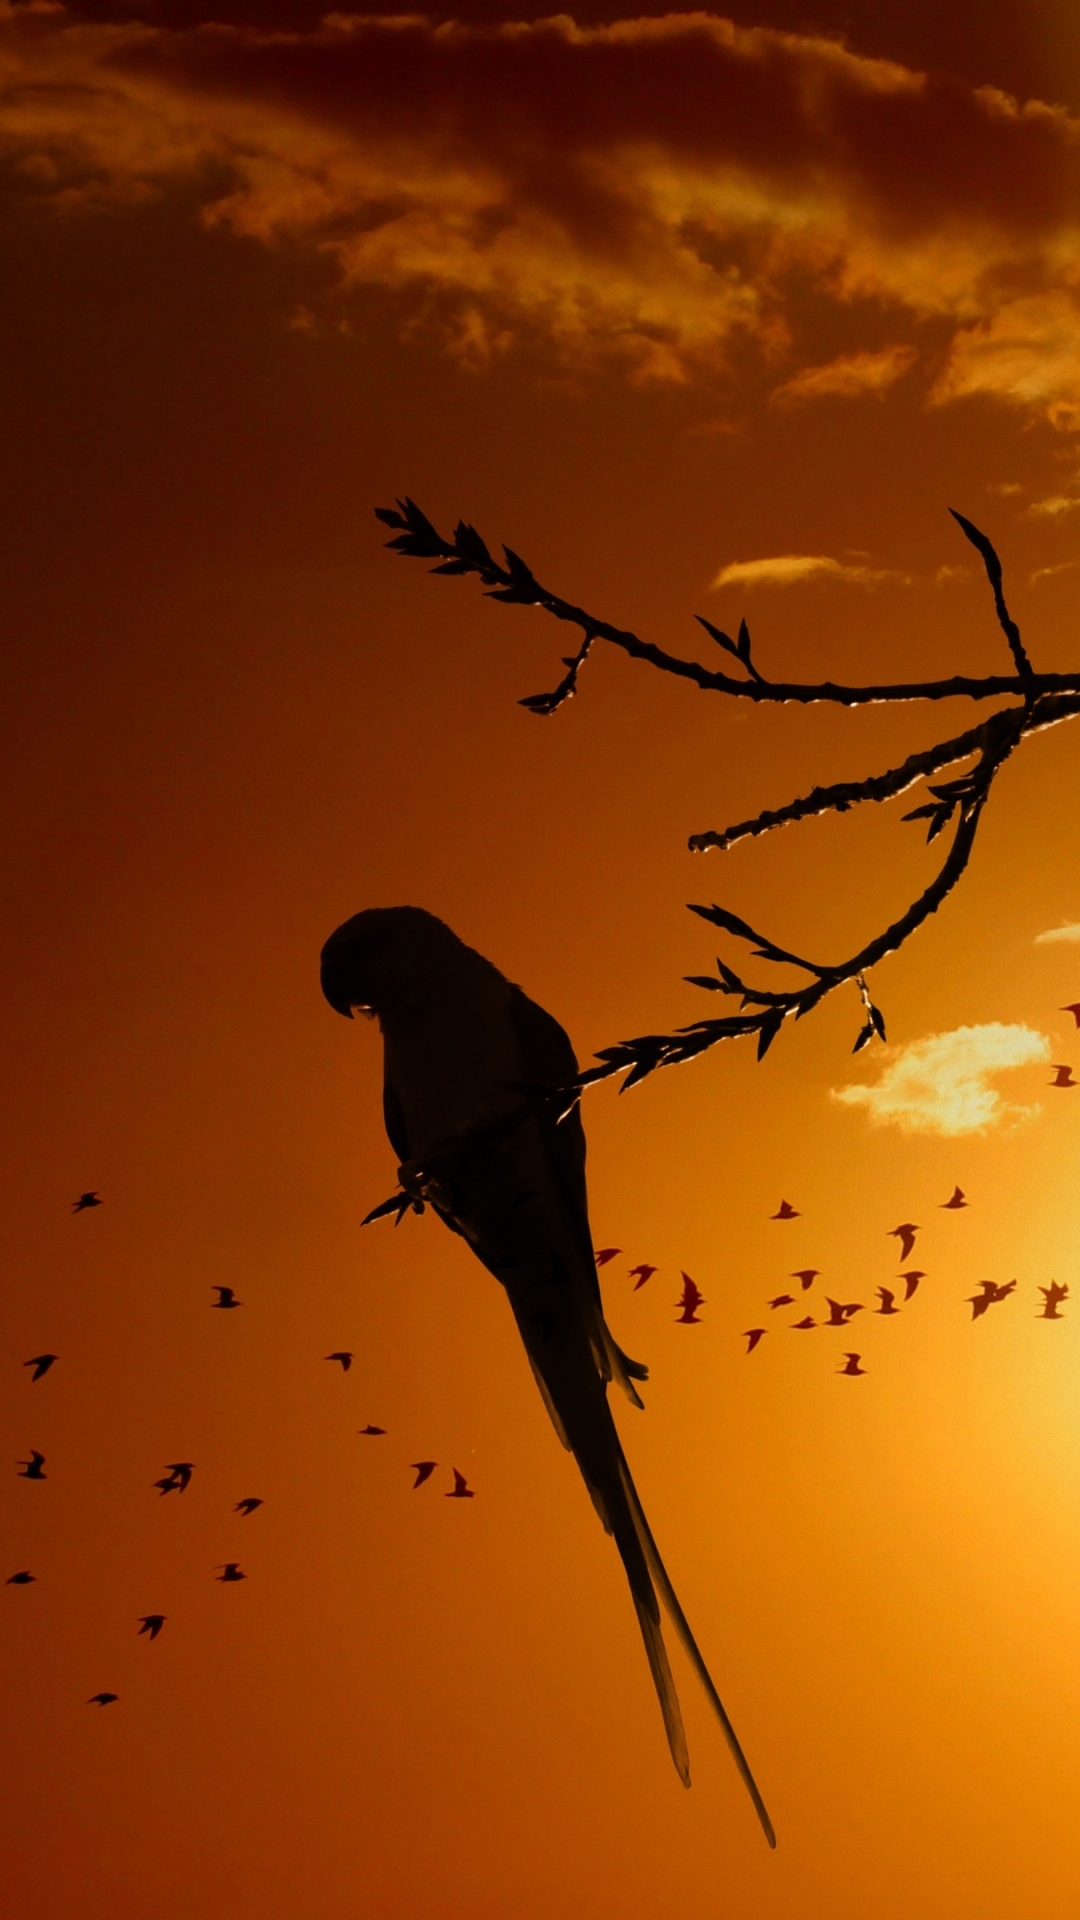 Parrot Silhouette in the Sunset